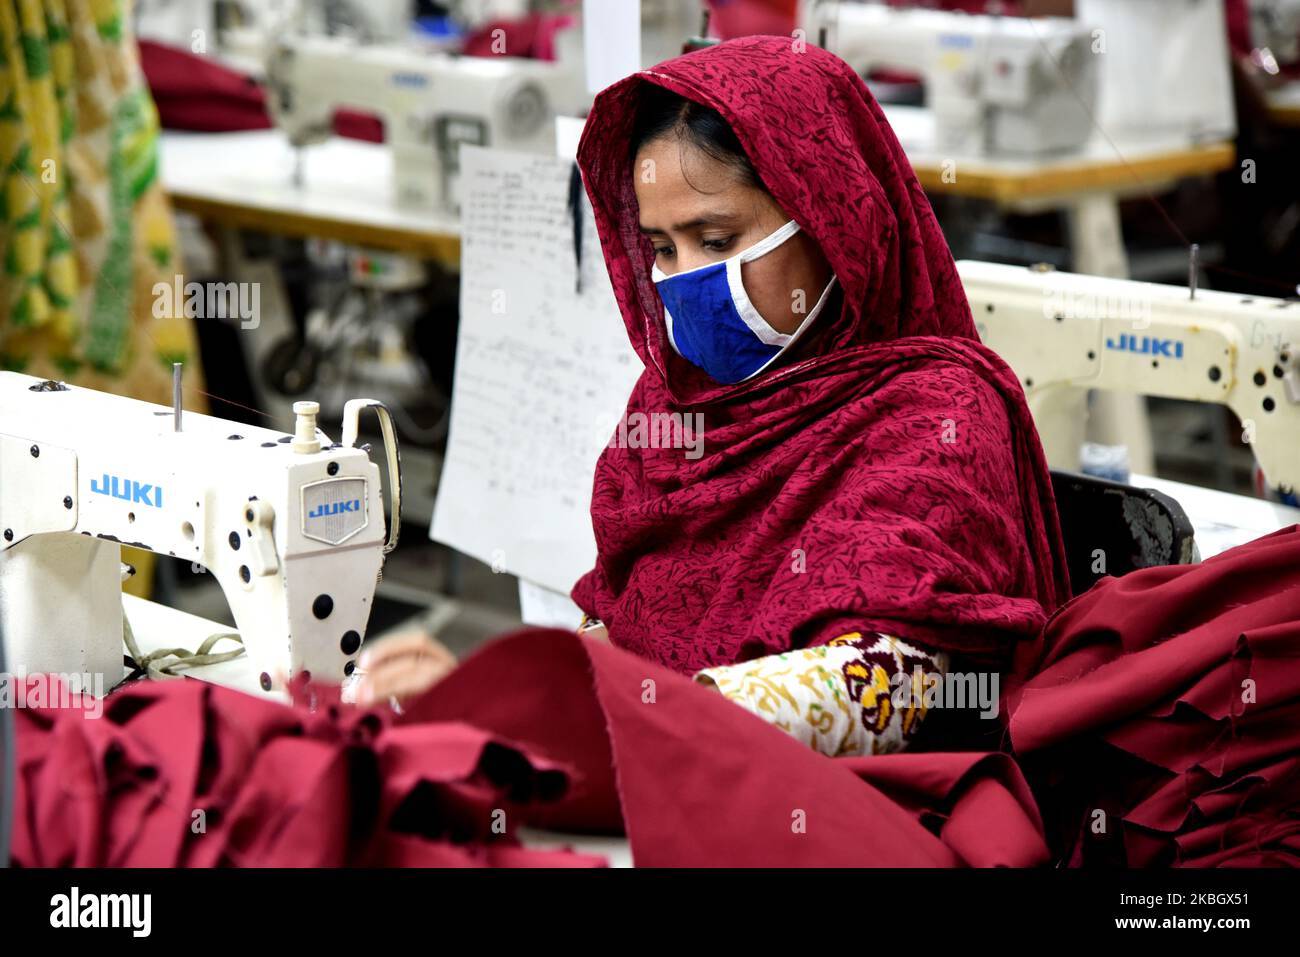 Bangladeshi worker works at a garment factory in Savar outskirts of Dhaka, Bangladesh, on February 13, 2020. The garment sector has provided employment opportunities to women from the rural areas that previously did not have any opportunity to be part of the formal workforce. This has given women the chance to be financially independent and have a voice in the family because now they contribute financially. However, women workers face problems. Most women come from low income families. Low wage of women workers and their compliance have enabled the industry to compete with the world market. Th Stock Photo